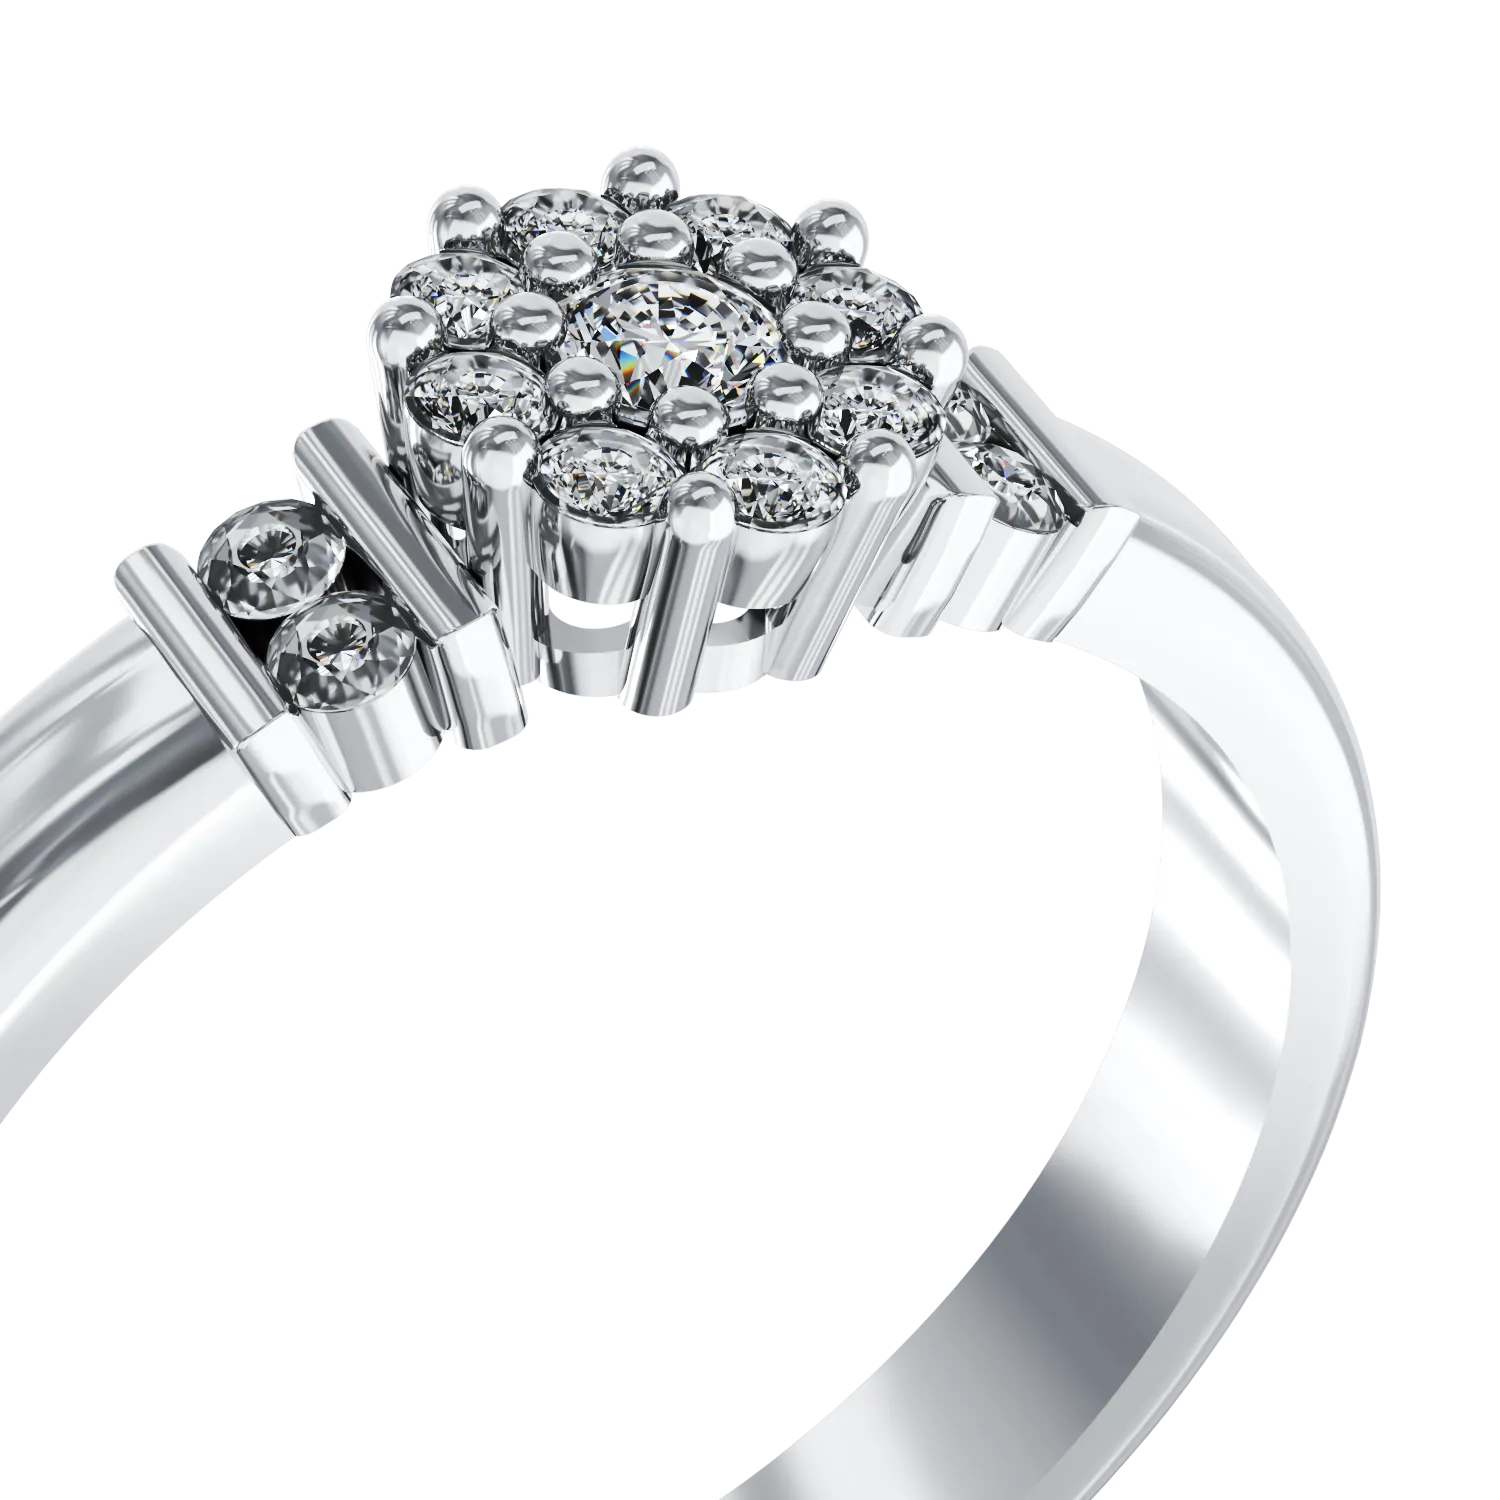 14K white gold engagement ring with 0.27ct diamonds